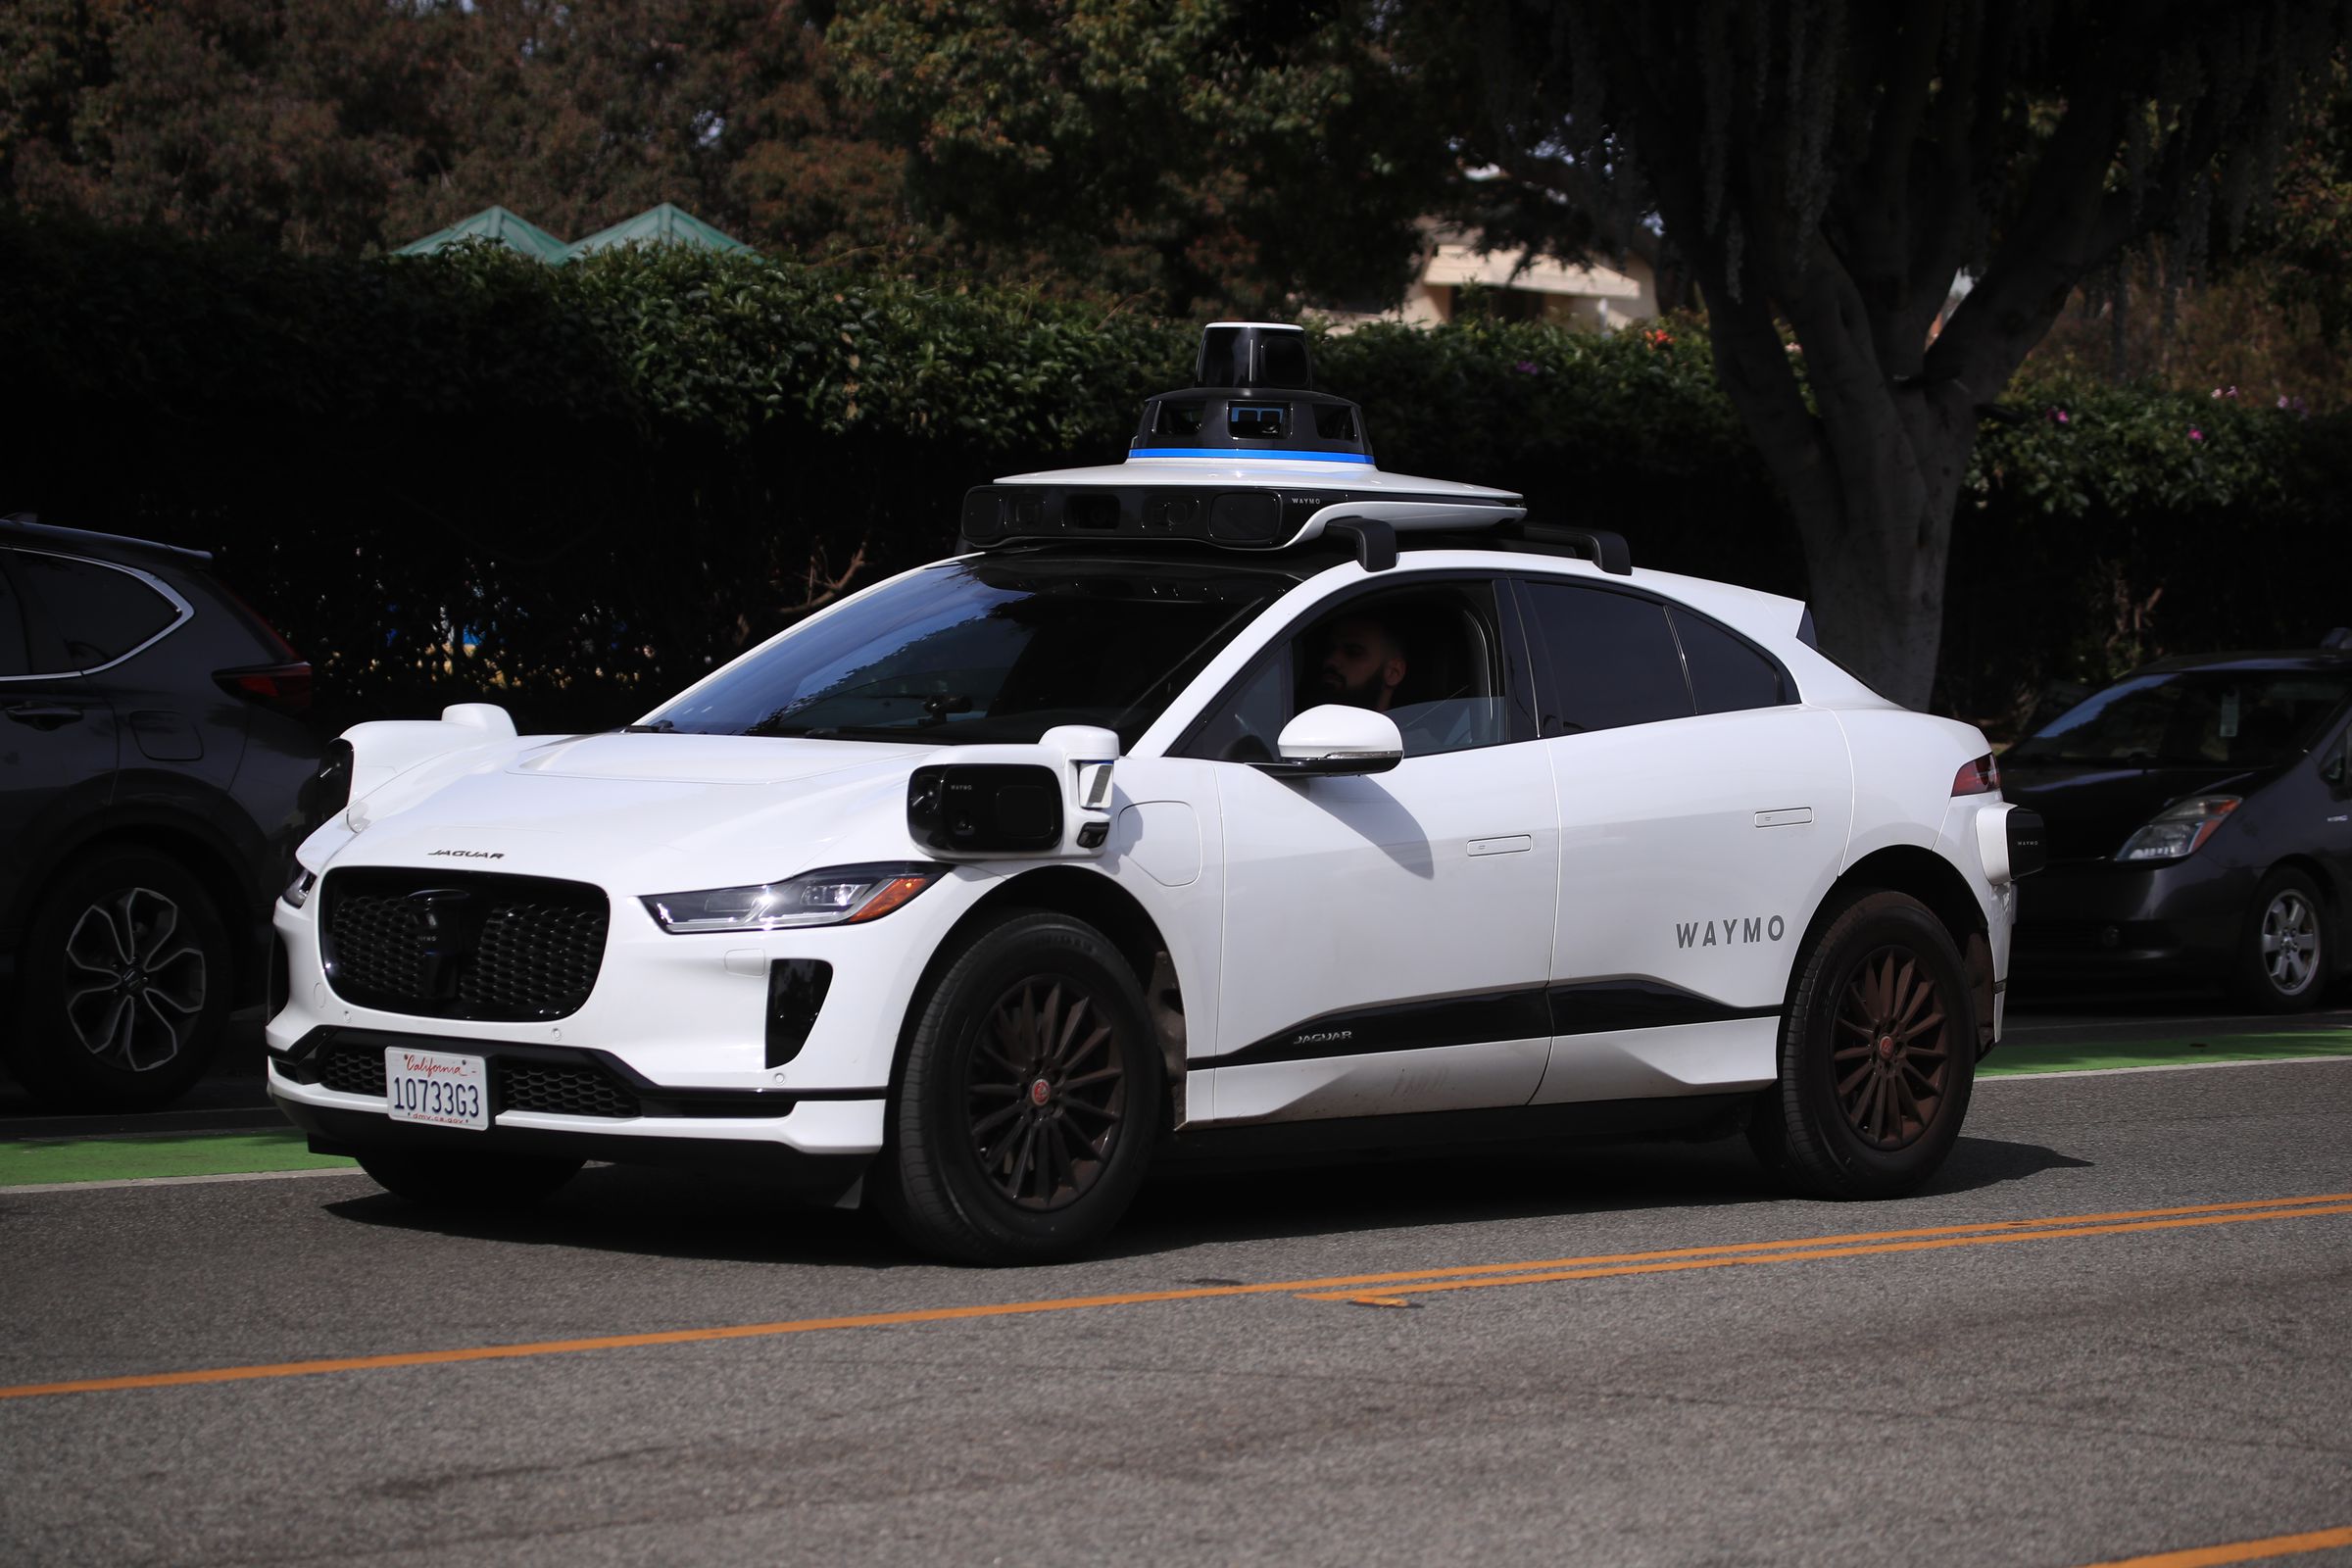 A self-driving Waymo car drives on a road in Santa Monica on February 21st, 2023.